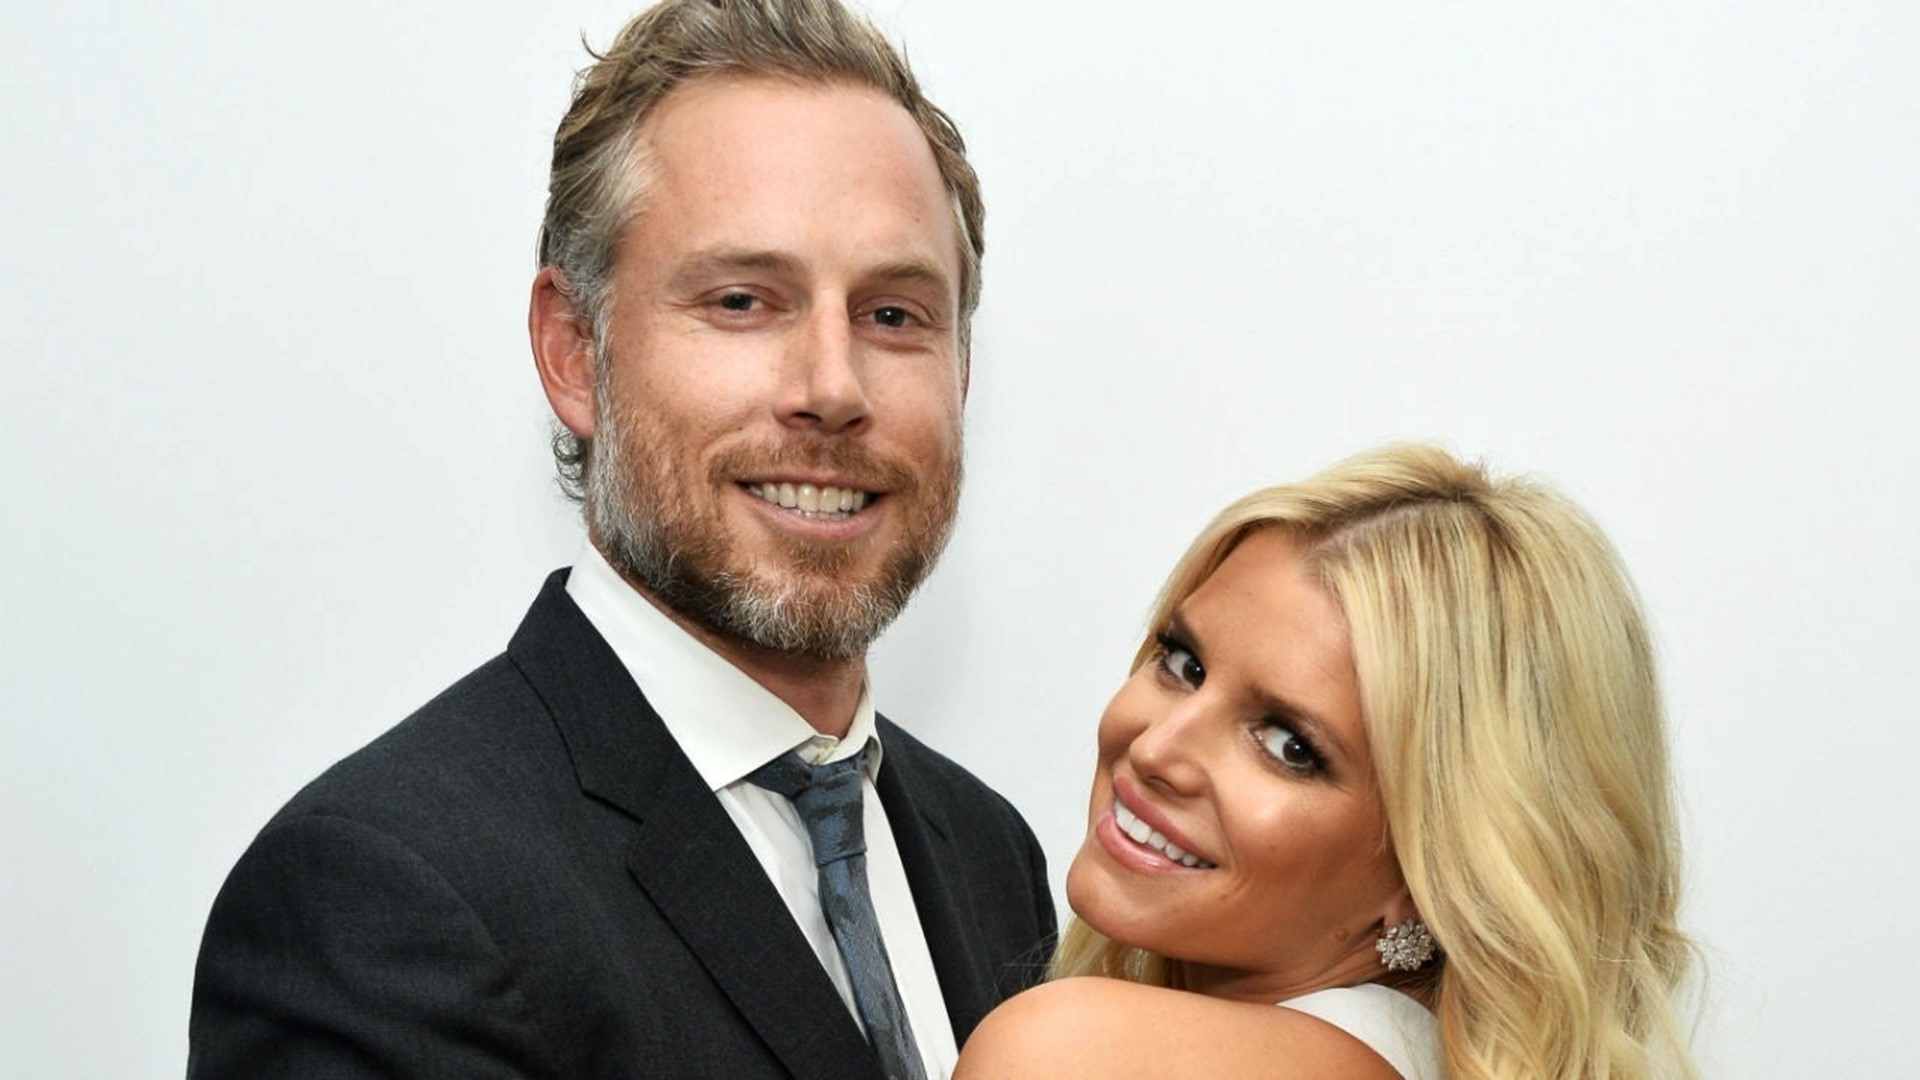 Jessica Simpson S Husband Eric Johnson Shares Gorgeous Wedding Photos In Honor Of 7th